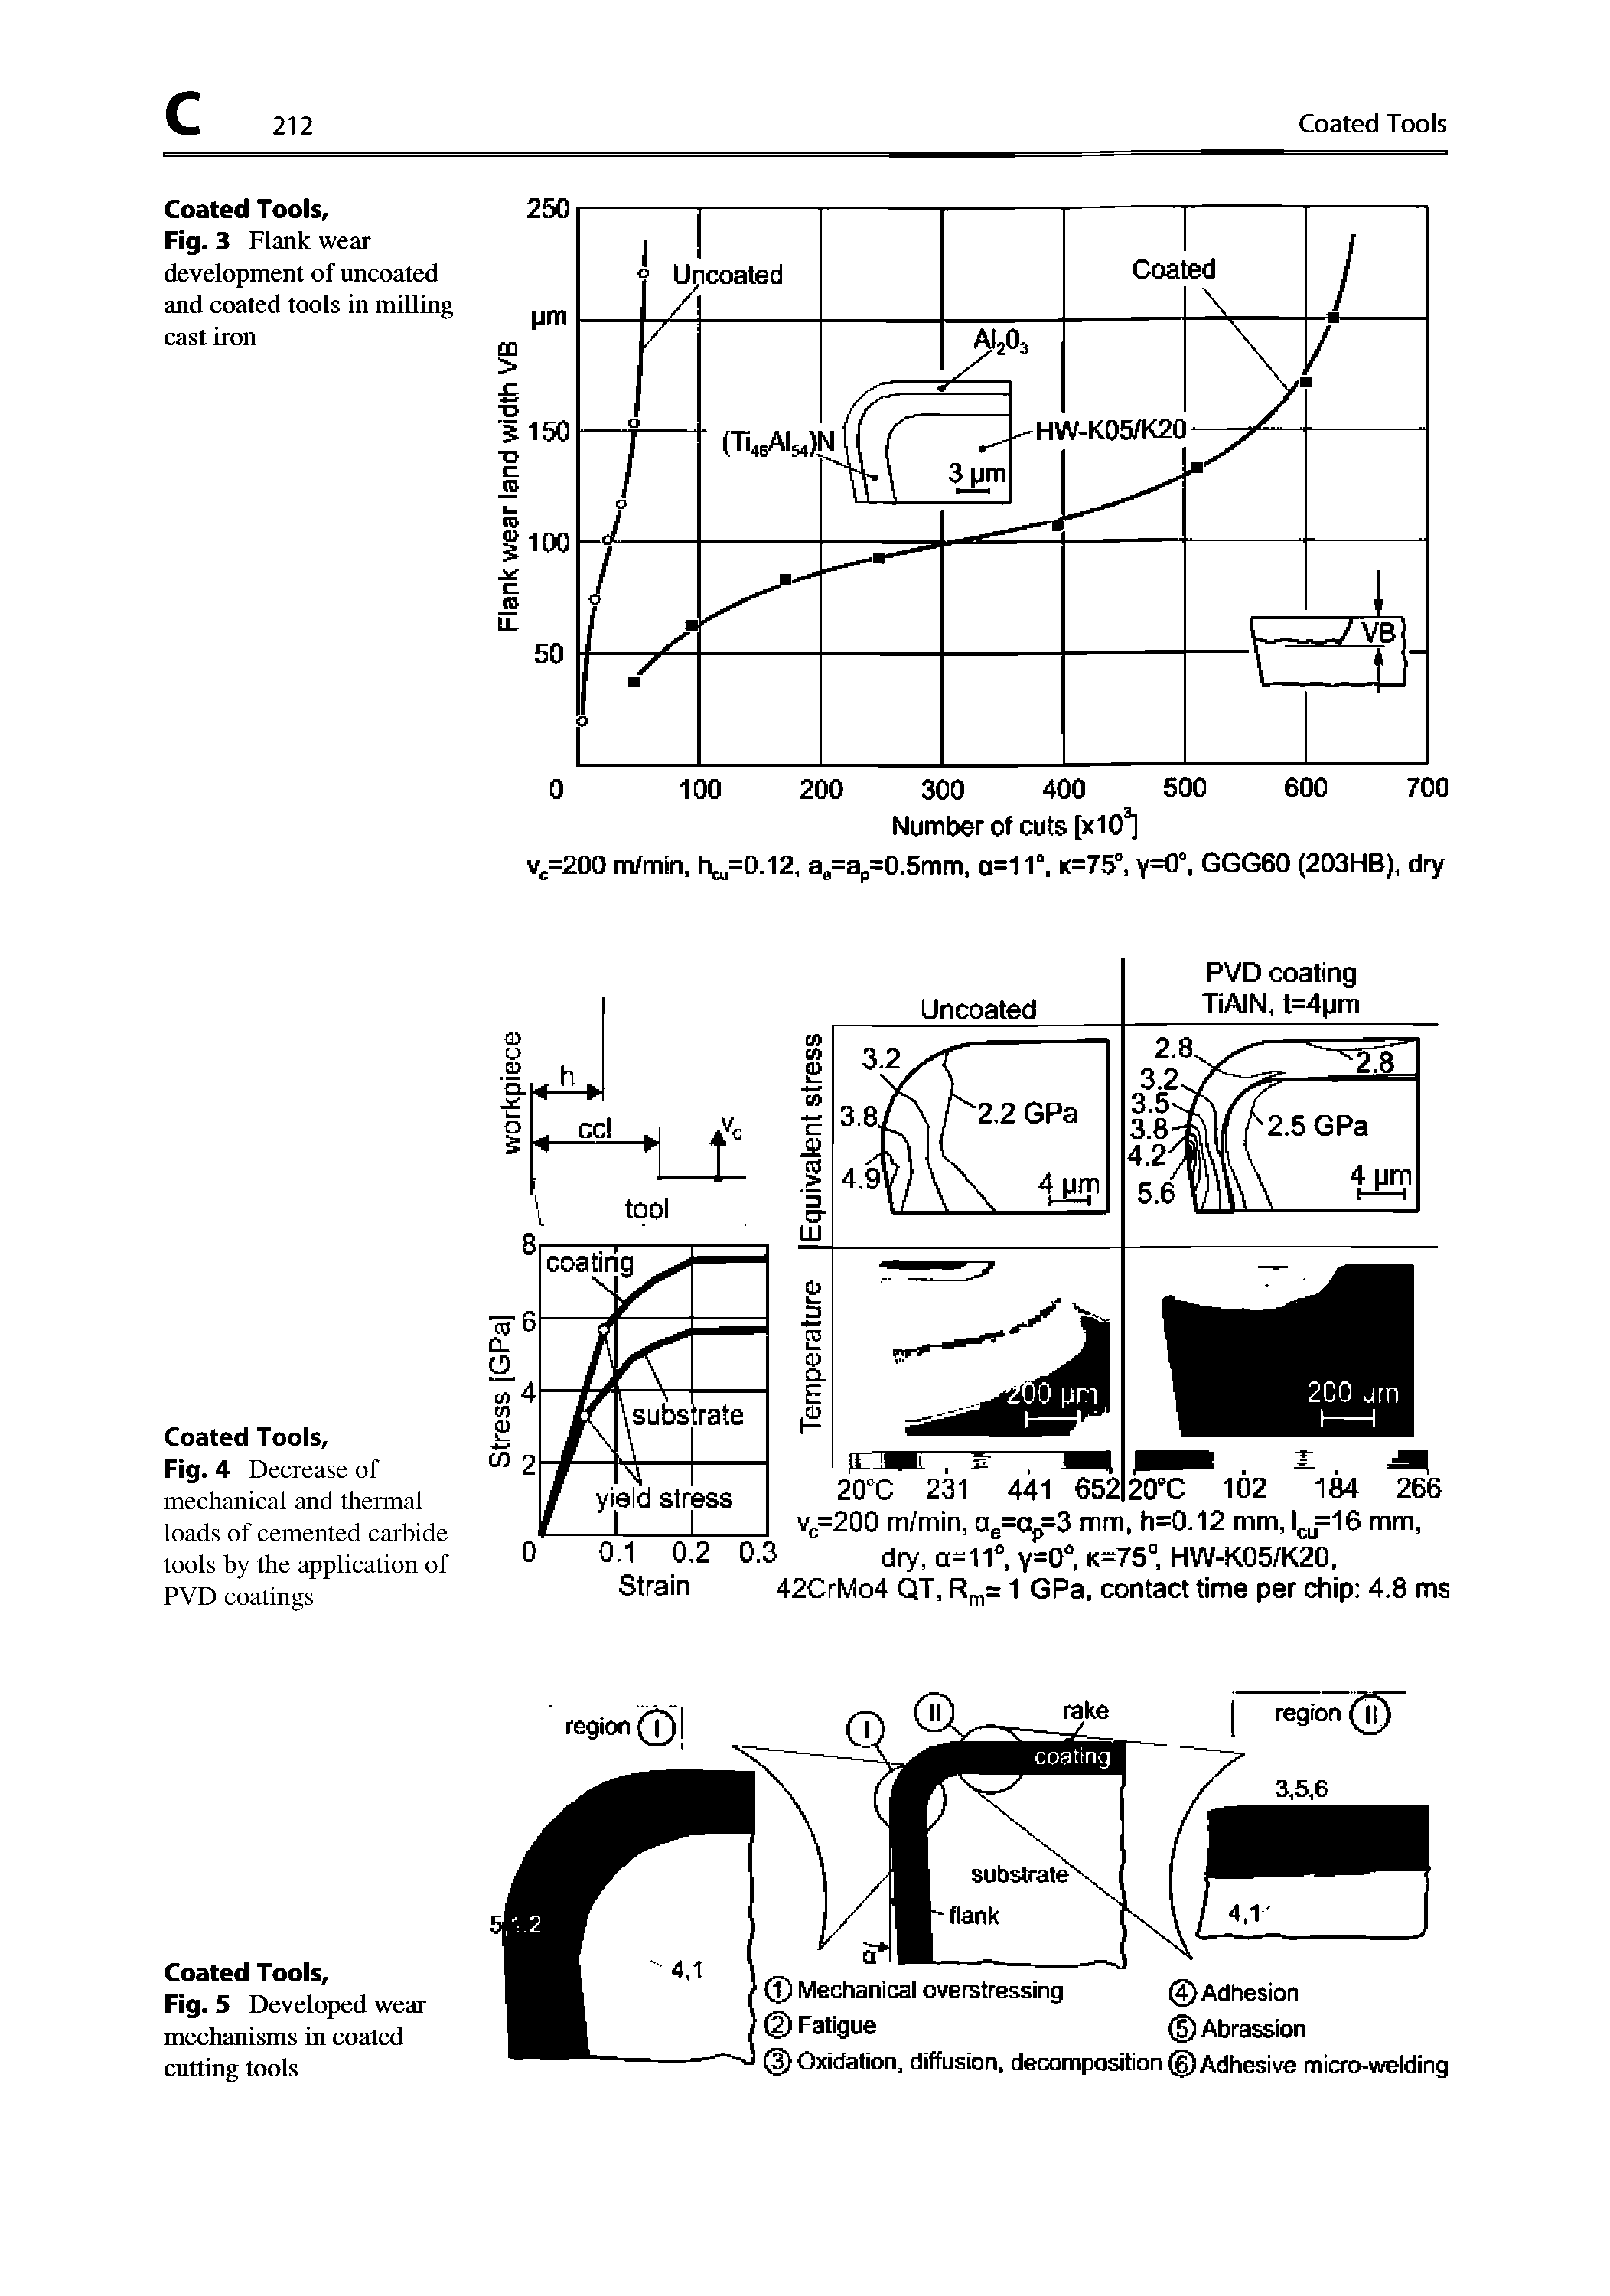 Fig. 3 Flank wear development of uncoated and coated tools in milling cast iron...